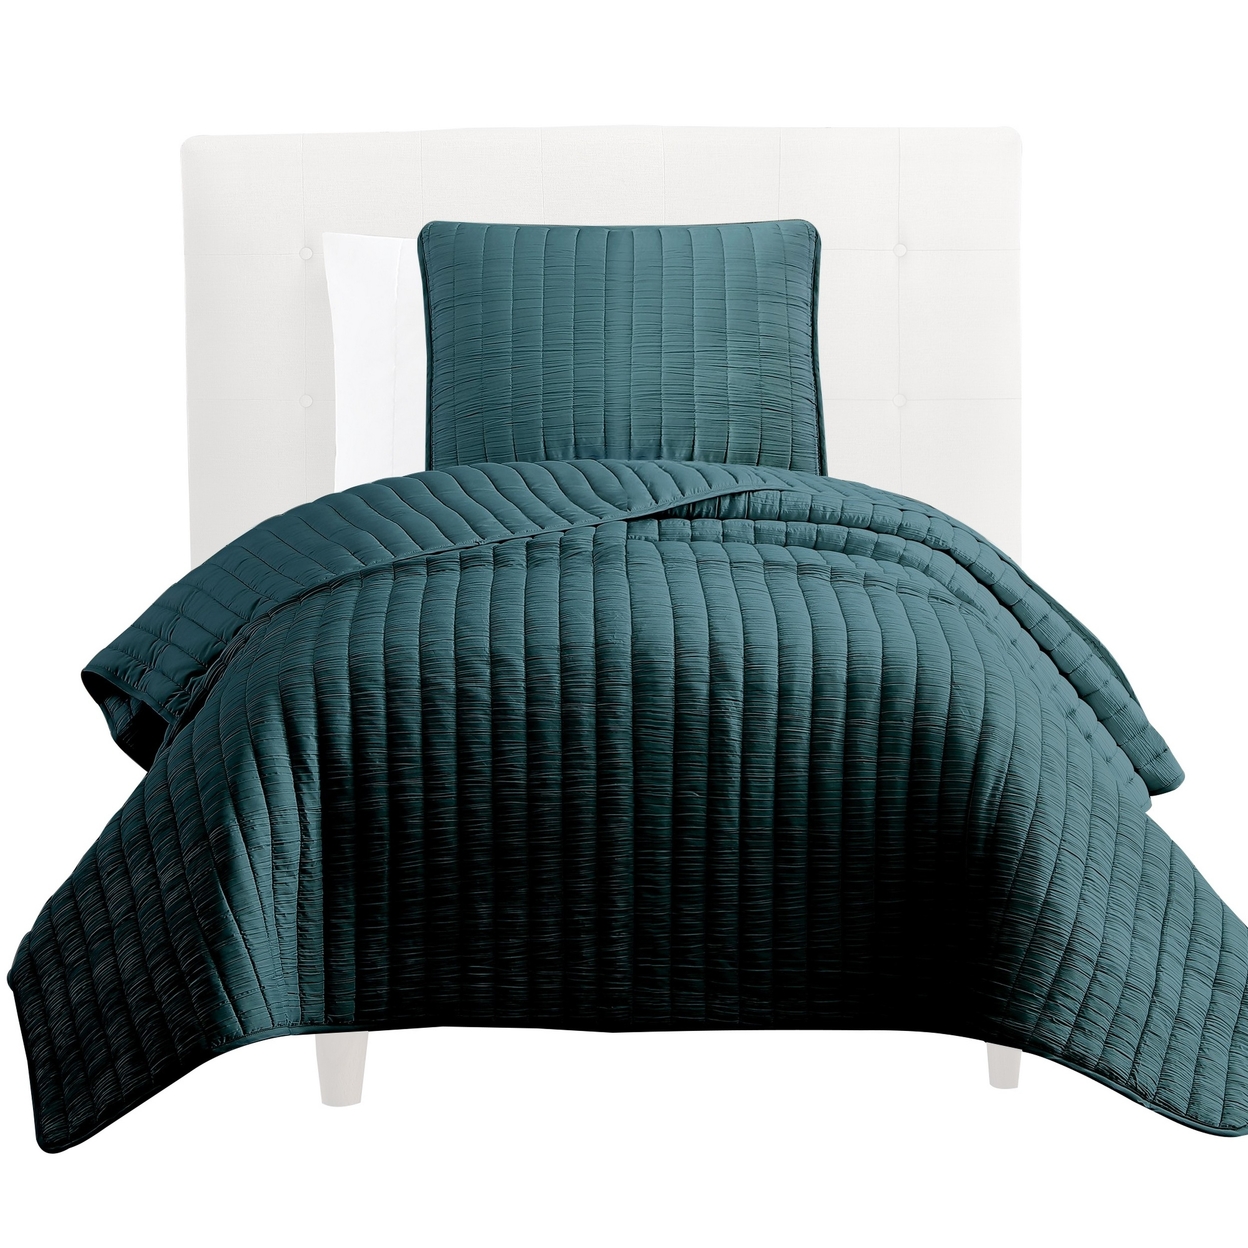 Elia Twin Contemporary Quilt Coverlet Set With Crinkle Texture, Teal Green - Saltoro Sherpi